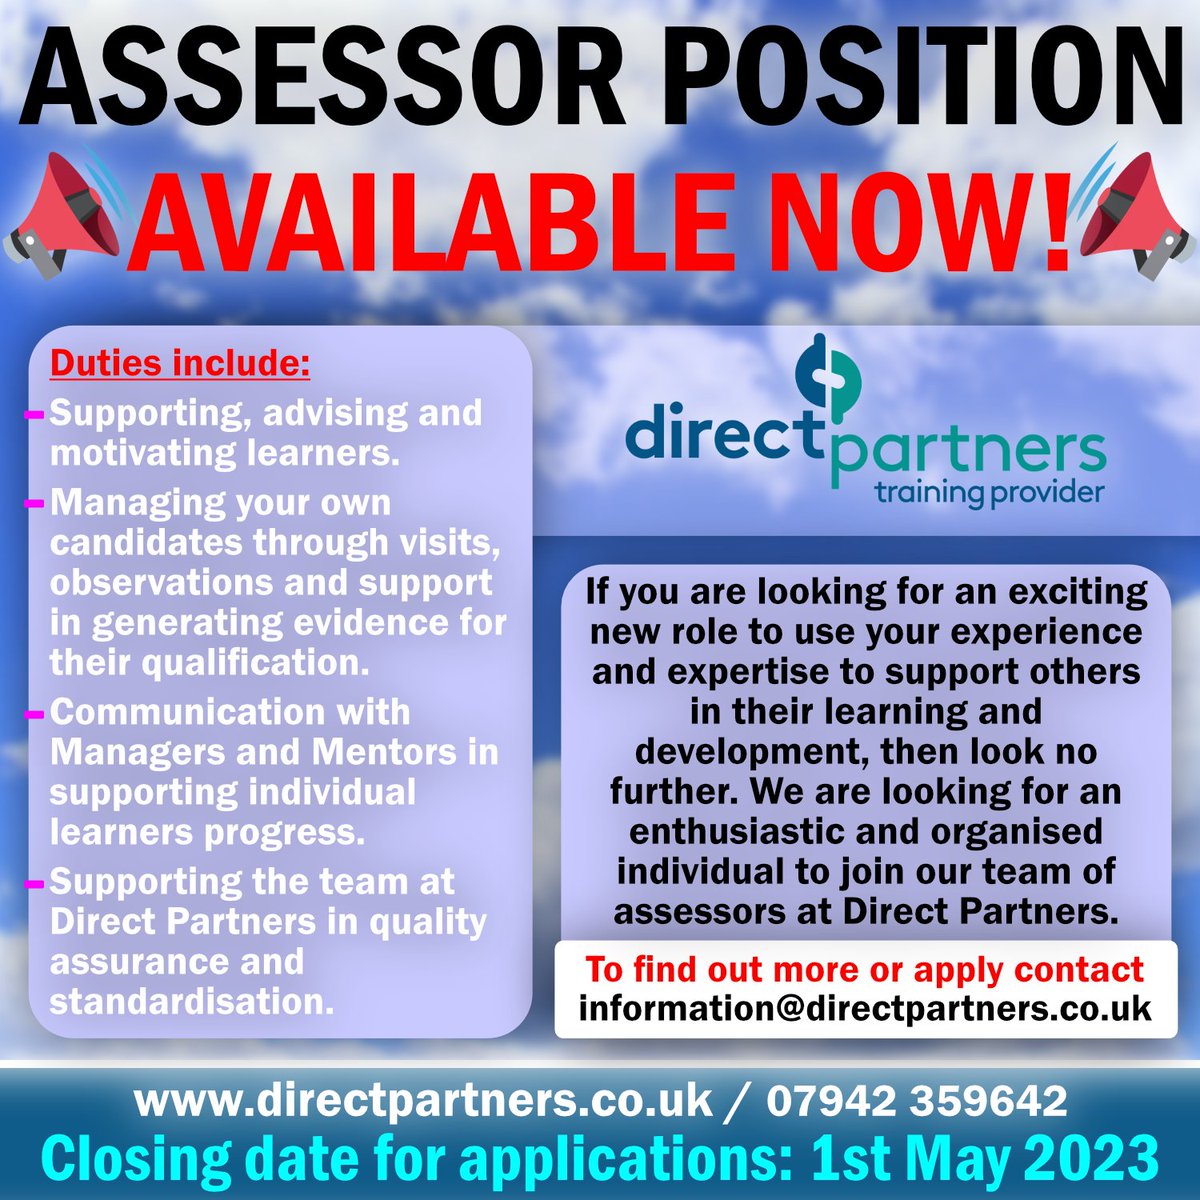 🚨New Active Leisure and Wellbeing Assessor position with Direct Partners is still available!
You will assess both CHILDCARE and SPORTS SVQ candidates.
Contact us us for more information!
#edinburghjobs #assessorjob